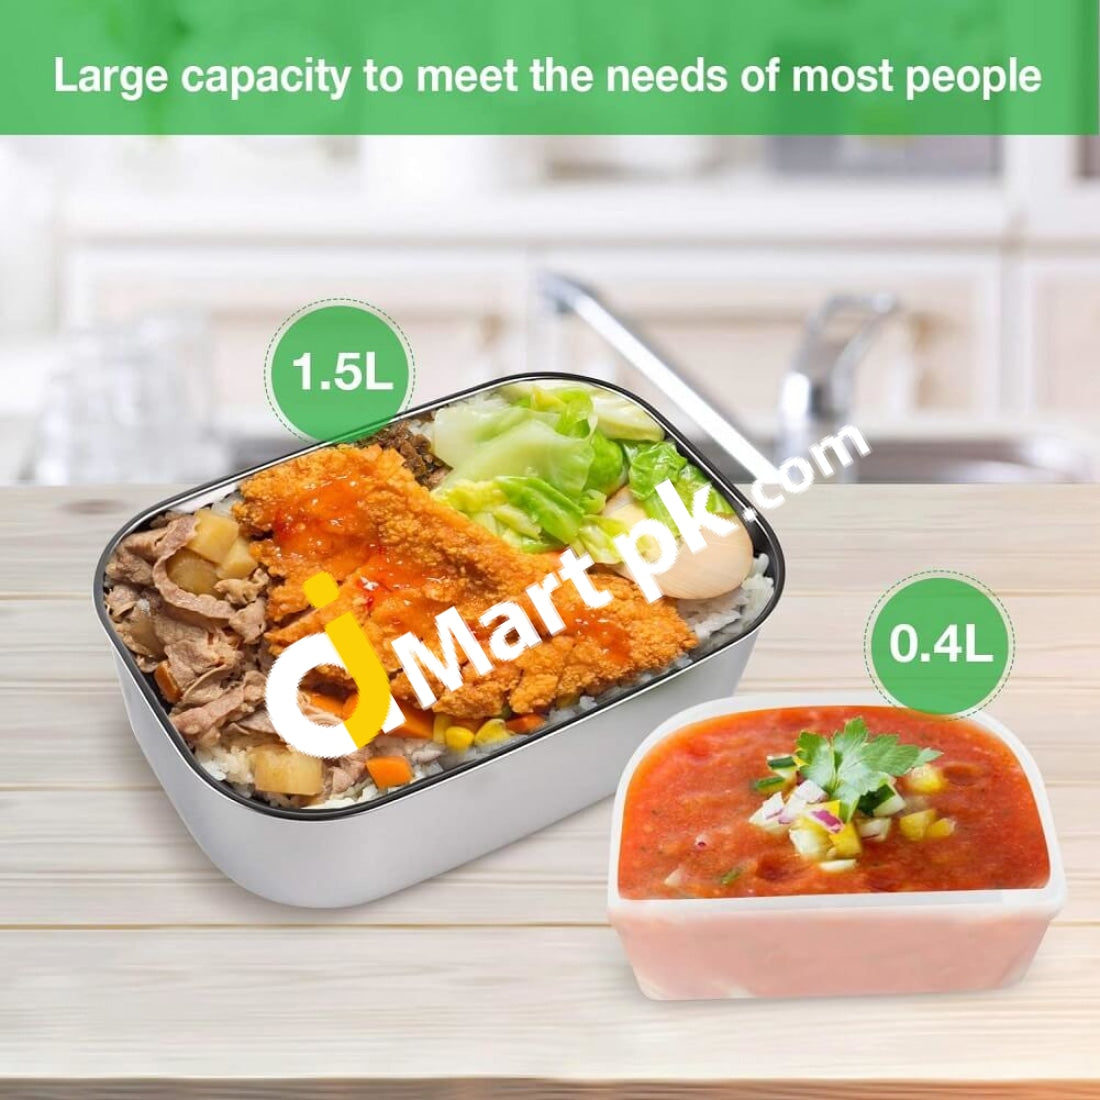 40W Electric Lunch Box Food Heater Warmer Heated Lunch Boxes for Men and  Kids